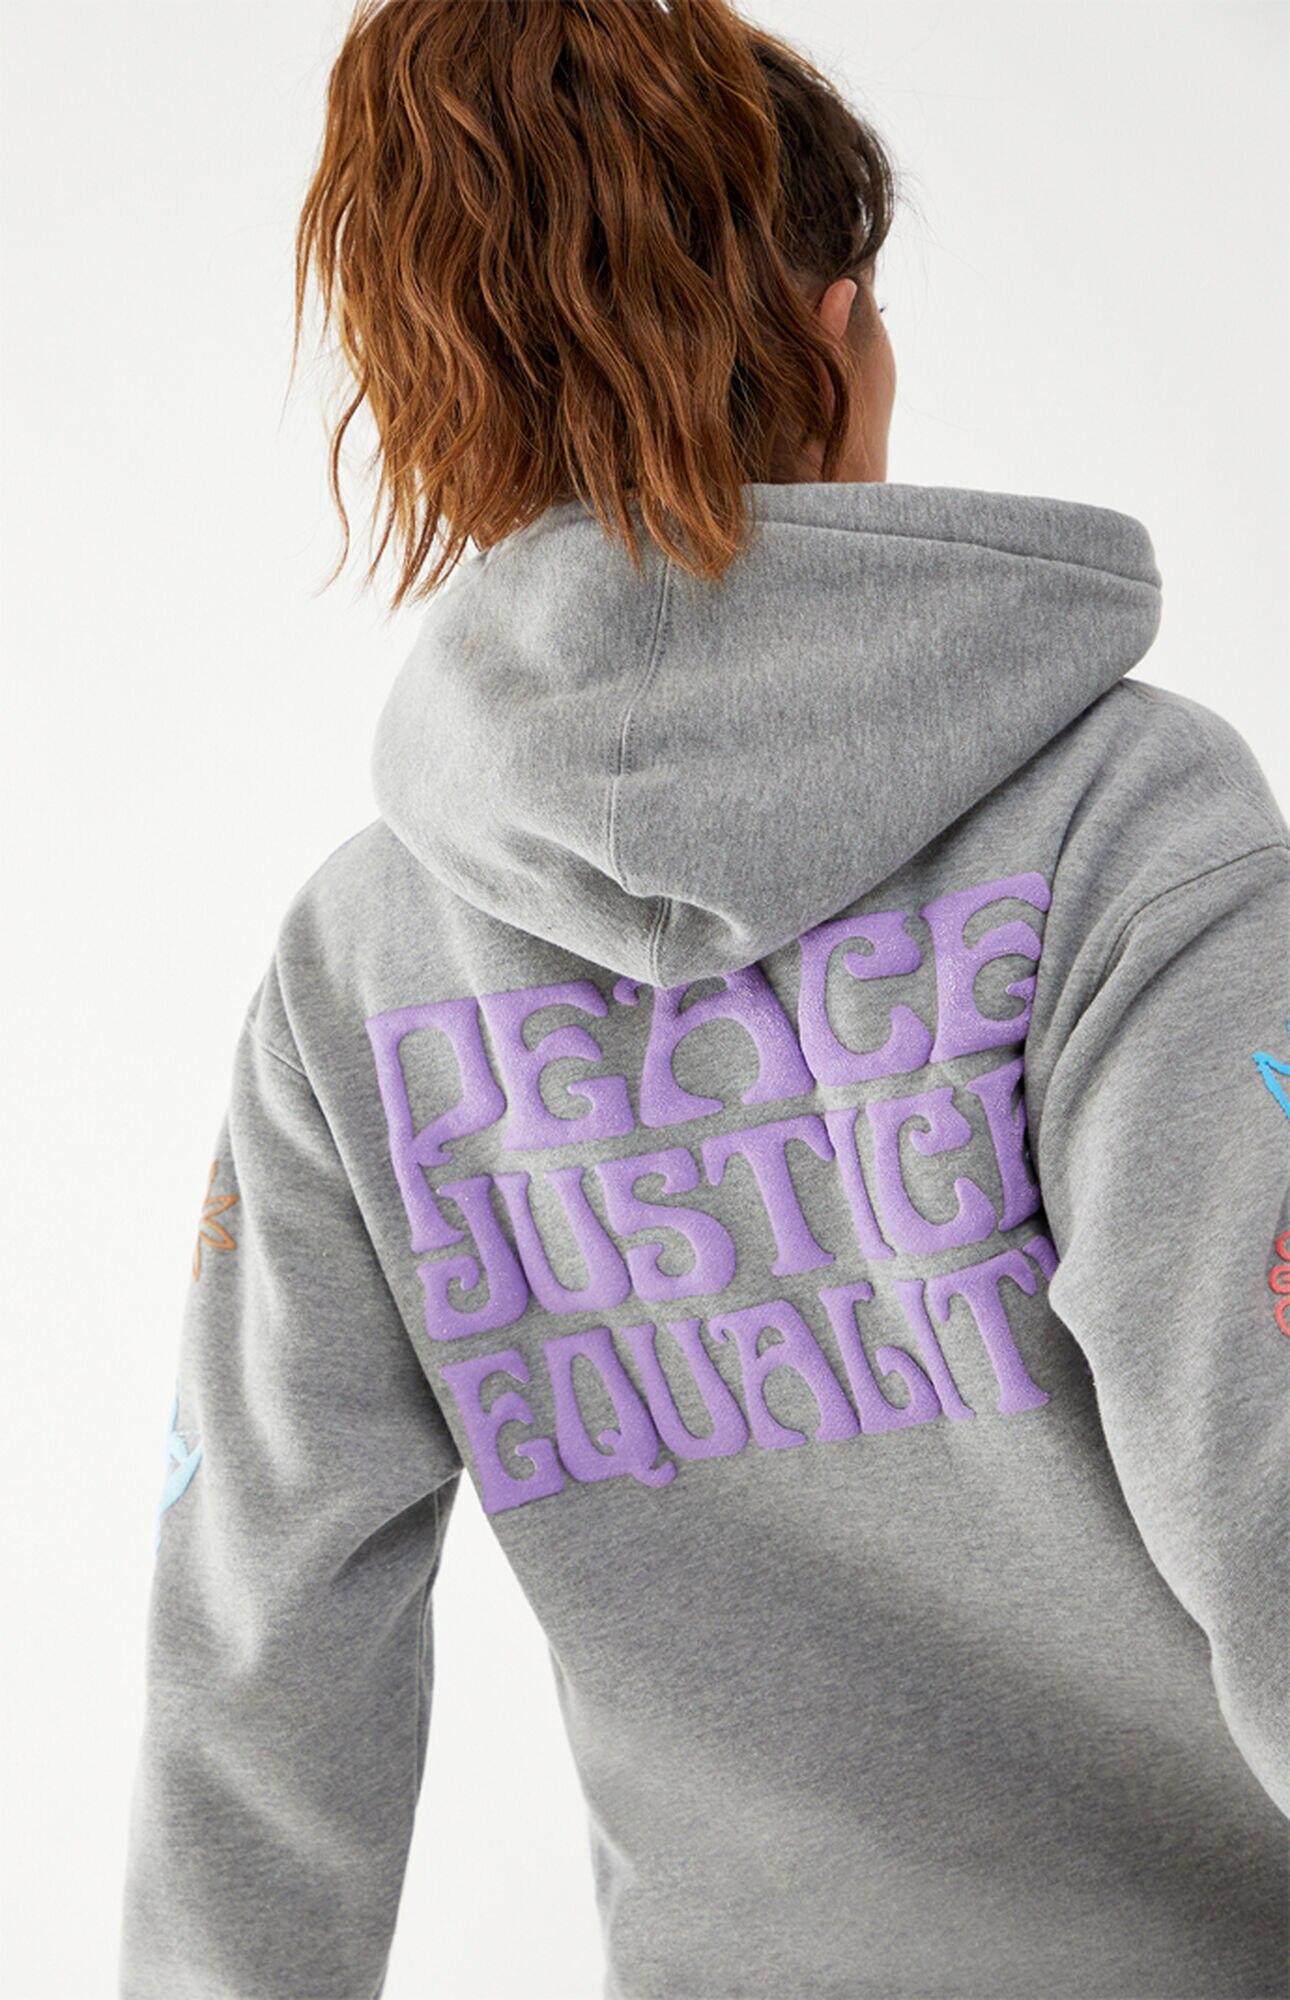 Obey Peace Justice Equality Hoodie in Gray - Lyst